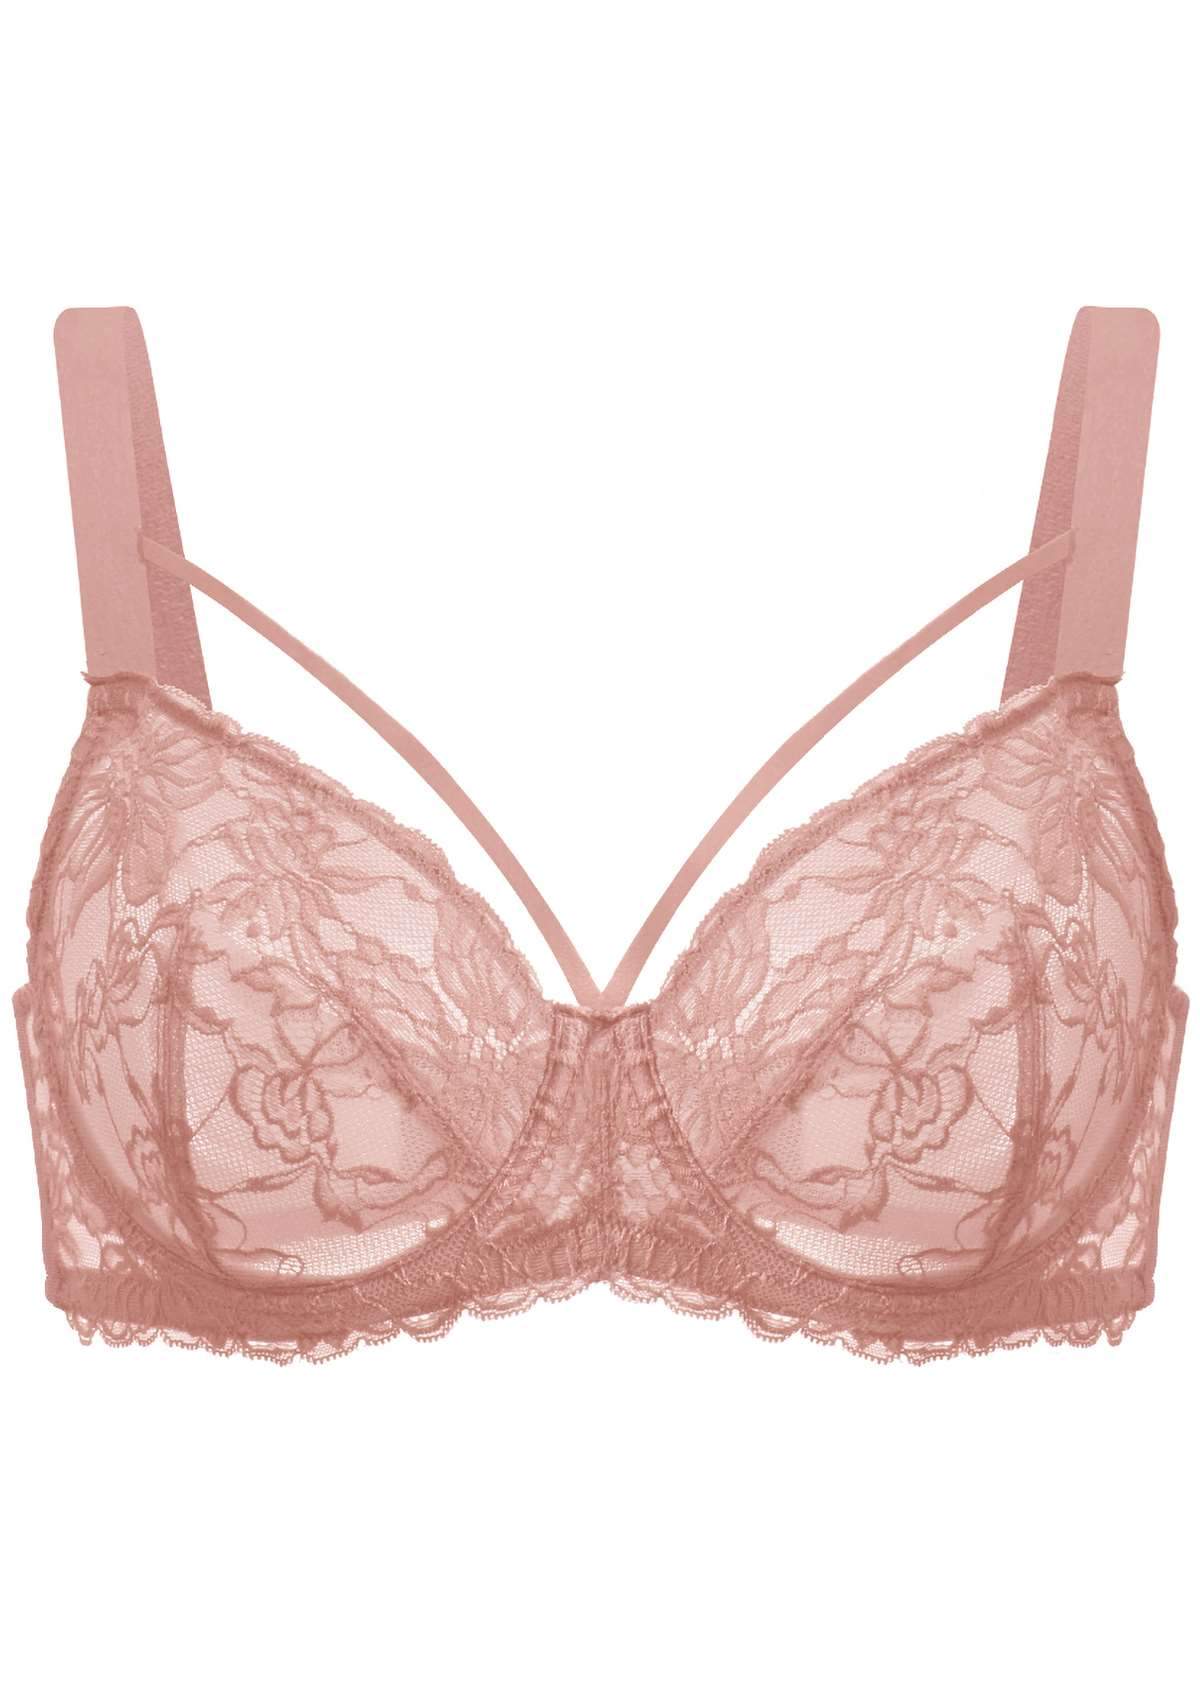 HSIA Pretty In Petals Lace Bra And Panty Sets: Bra For Big Boobs - Light Coral / 32 / D